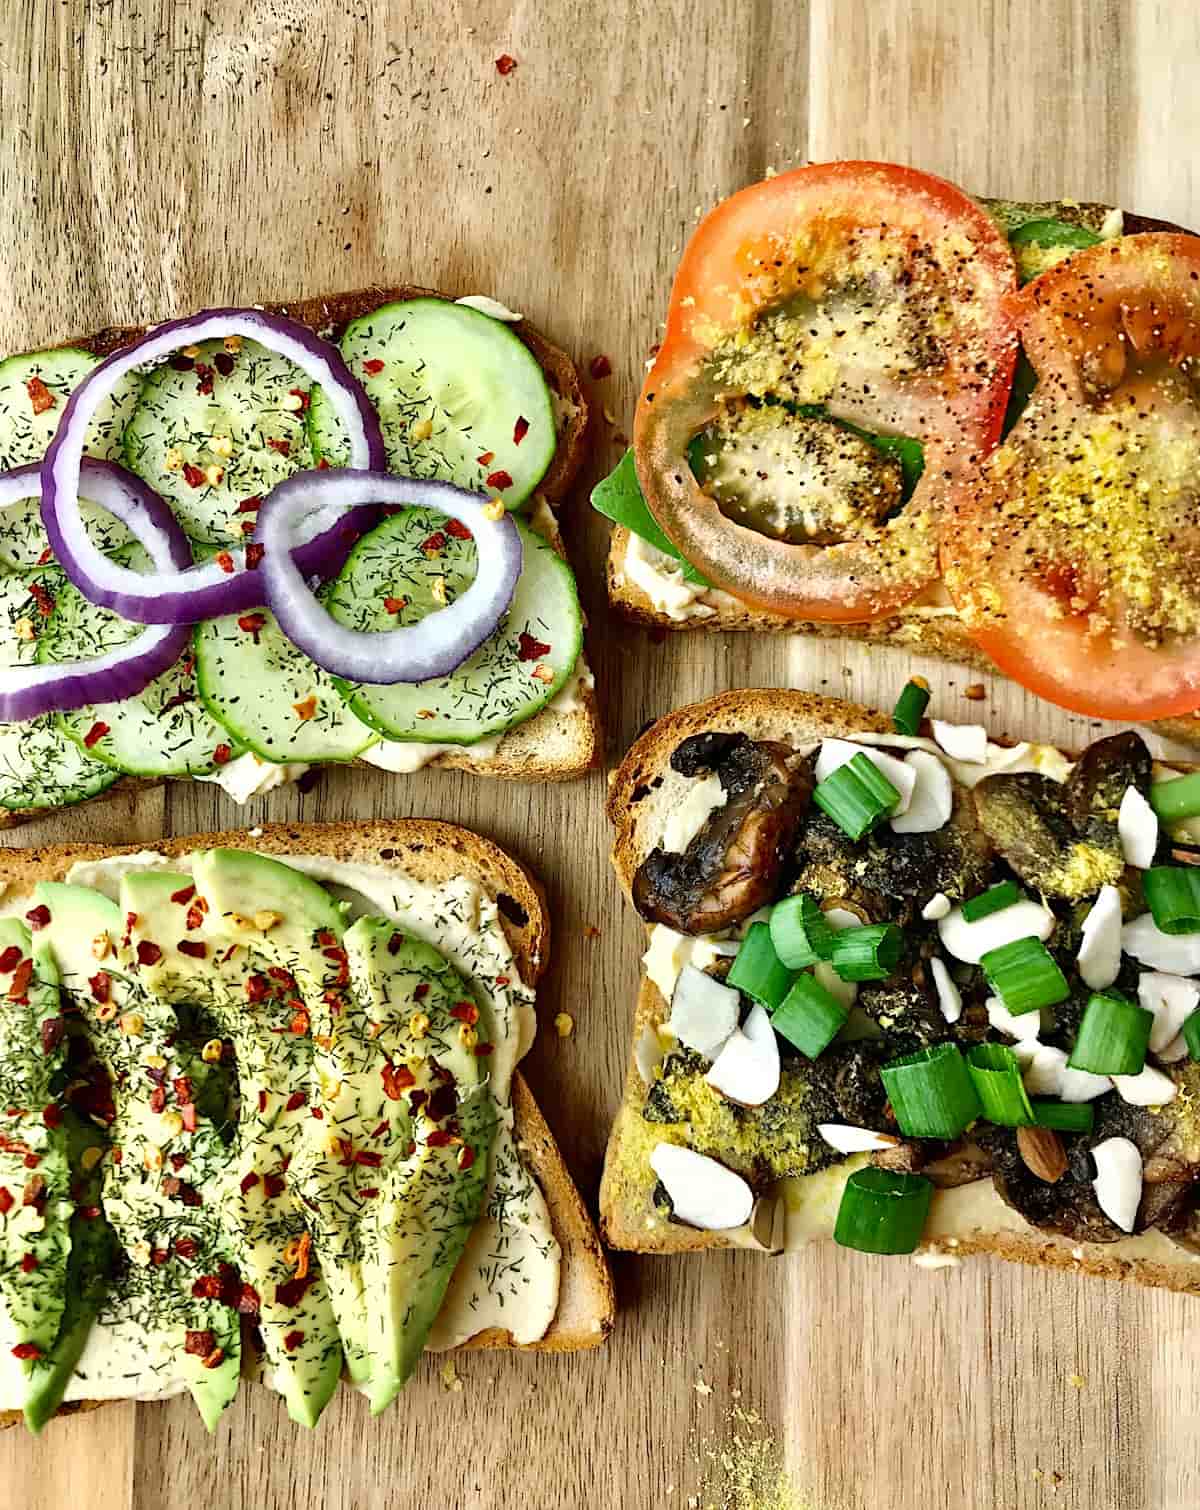 Four slices of hummus toast with various toppings on a wooden cutting board.